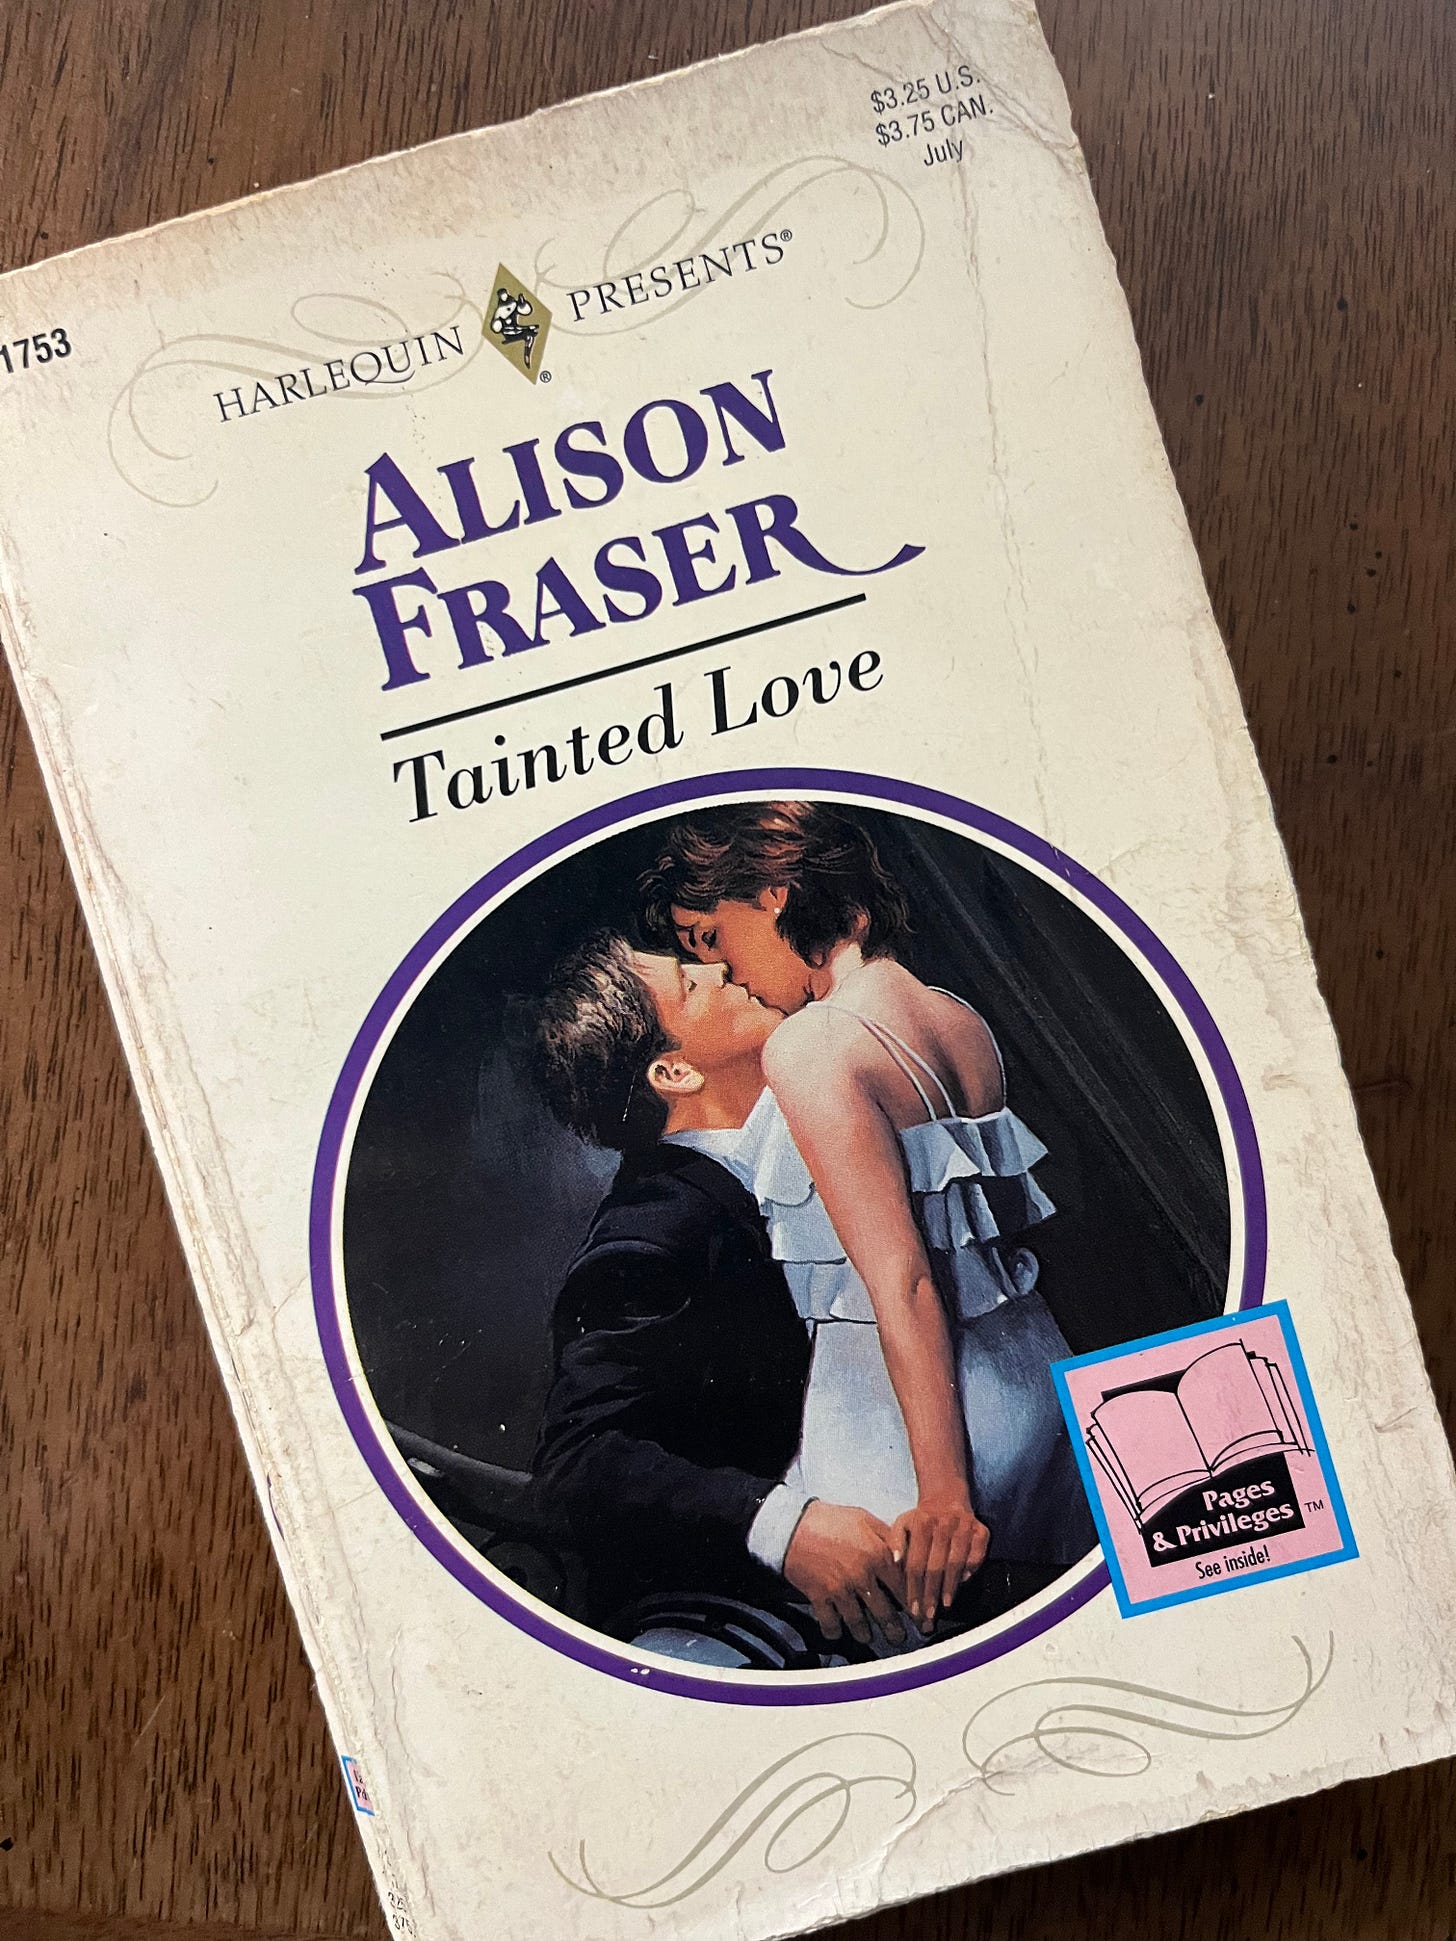 Image of front cover of Tainted Love, which shows a very realistic illustration of a man in a tux sitting and a woman kinda in his lap, maybe sitting on the arm of the chair, they're kissing passionately, she's wearing a ruffled dress, their hands are touching